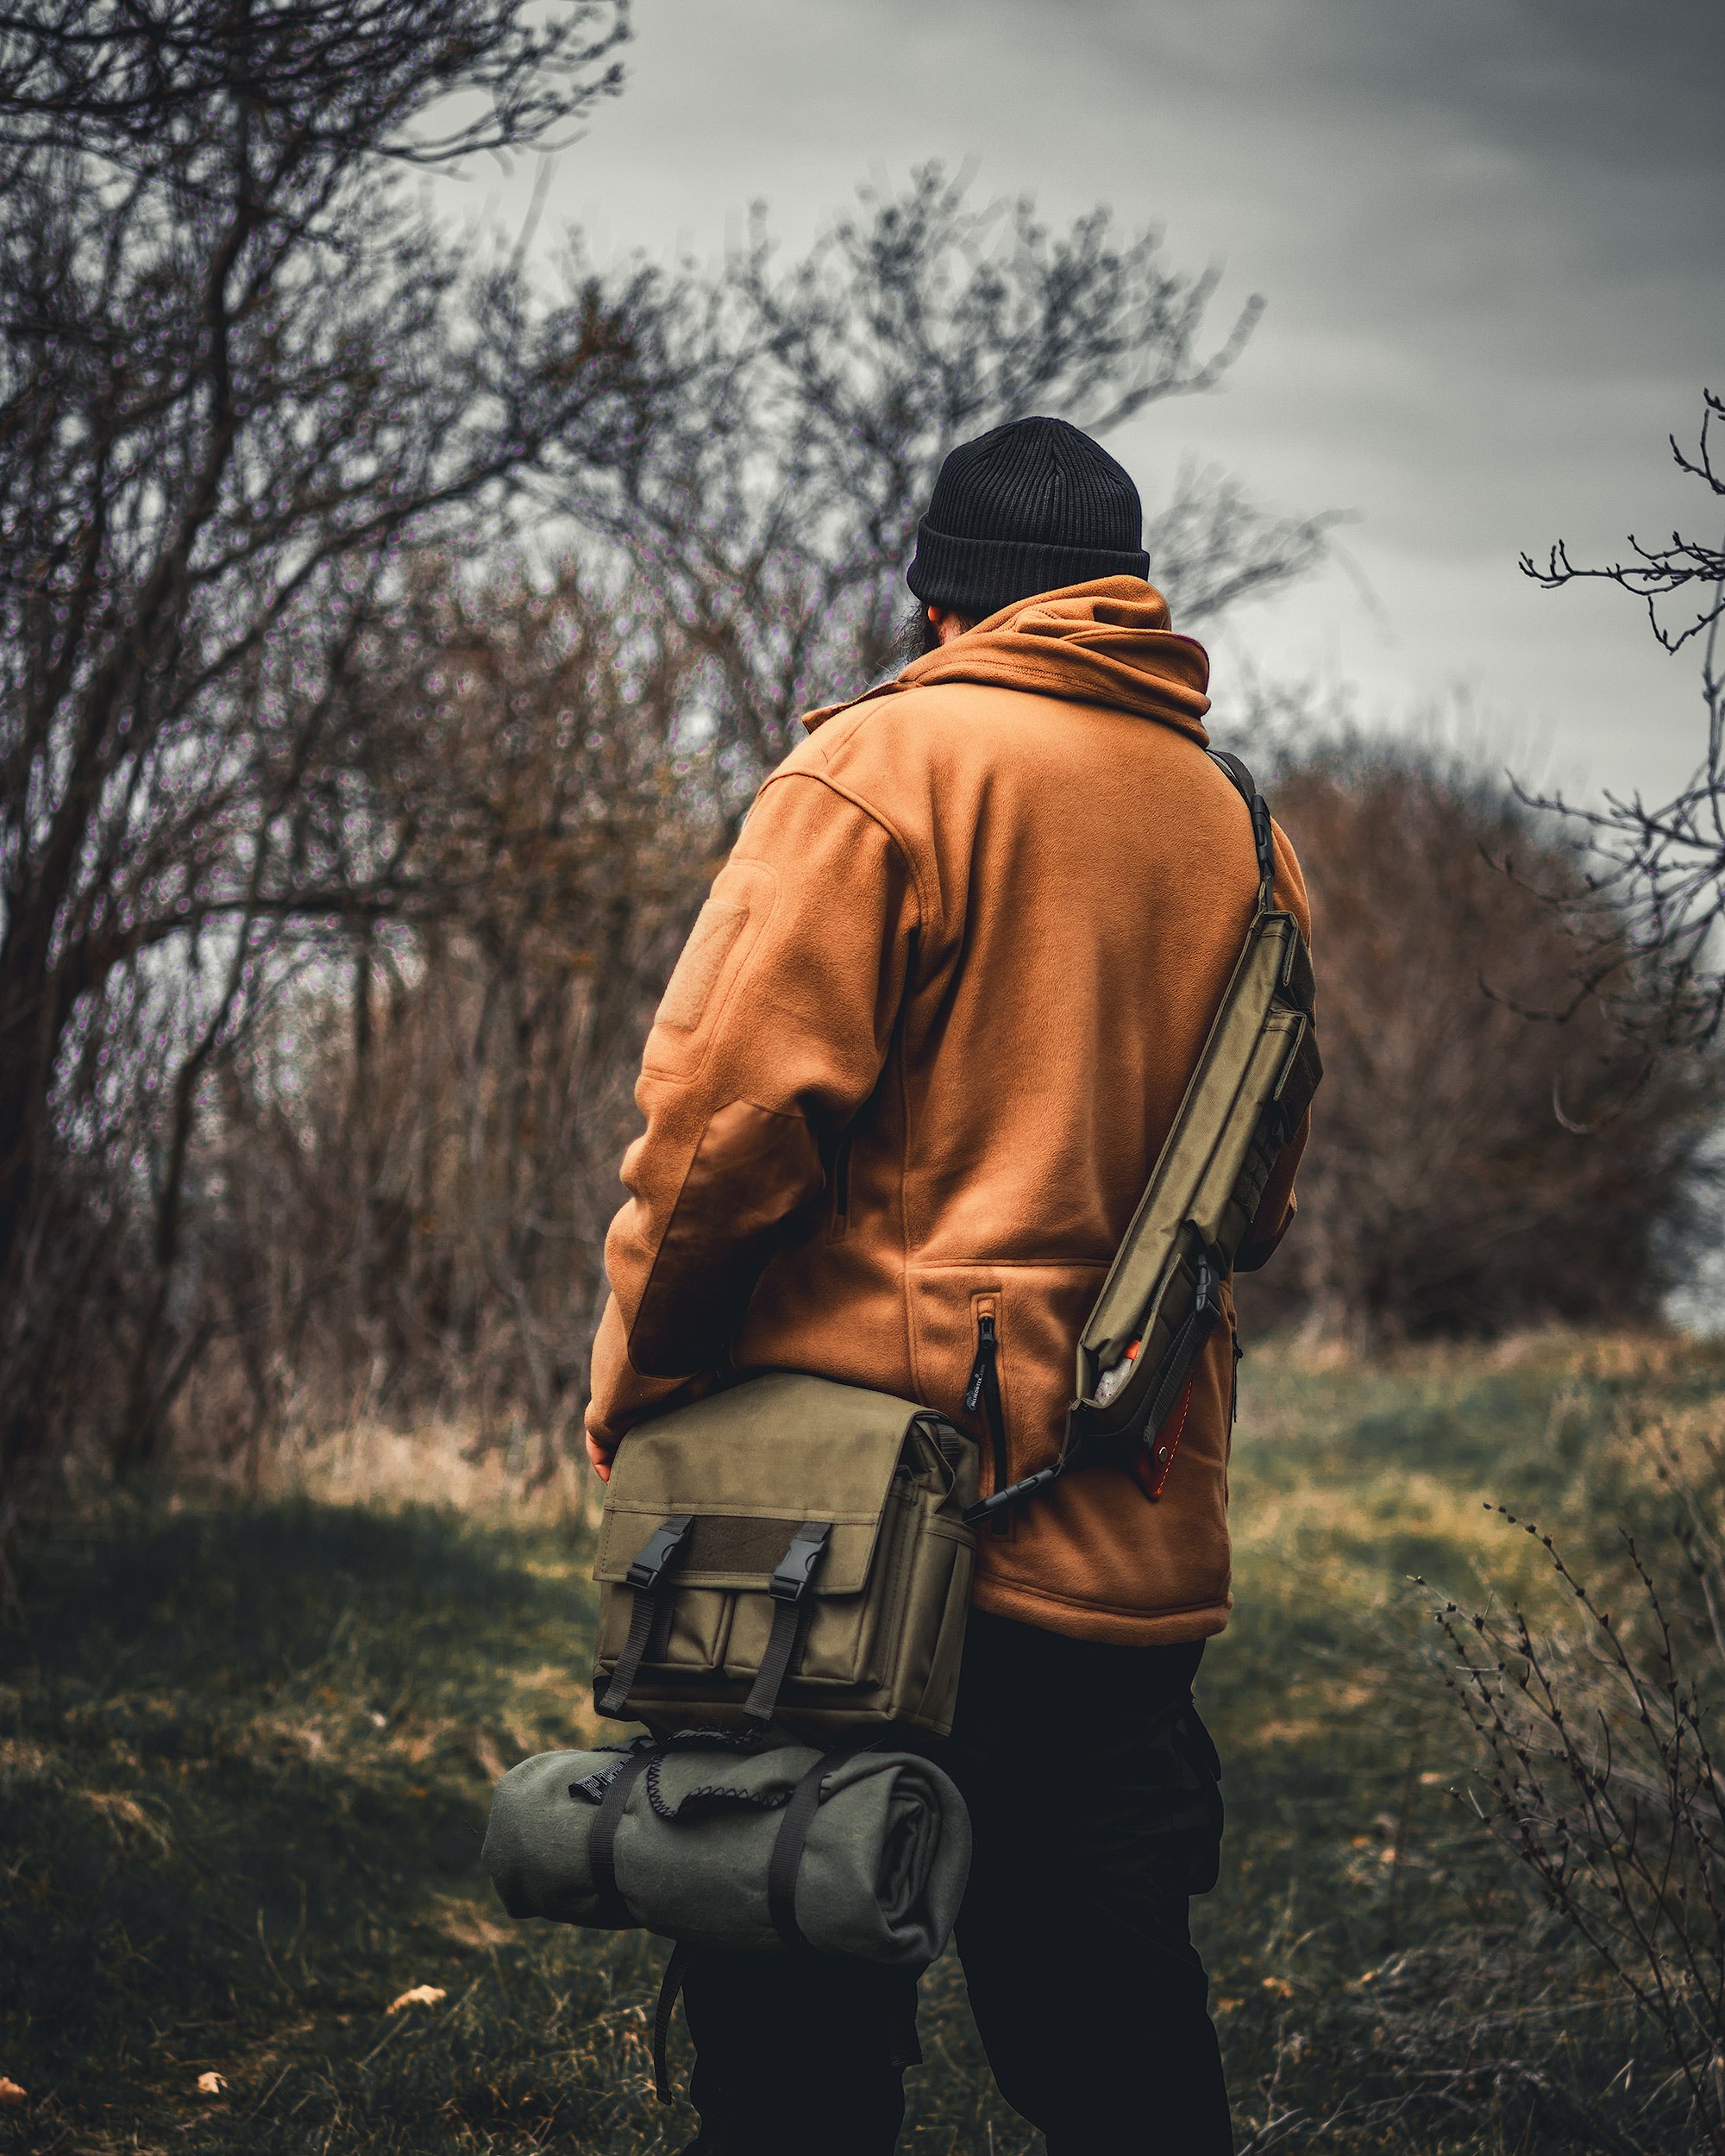 What is the difference between Hiking and Bushcraft?